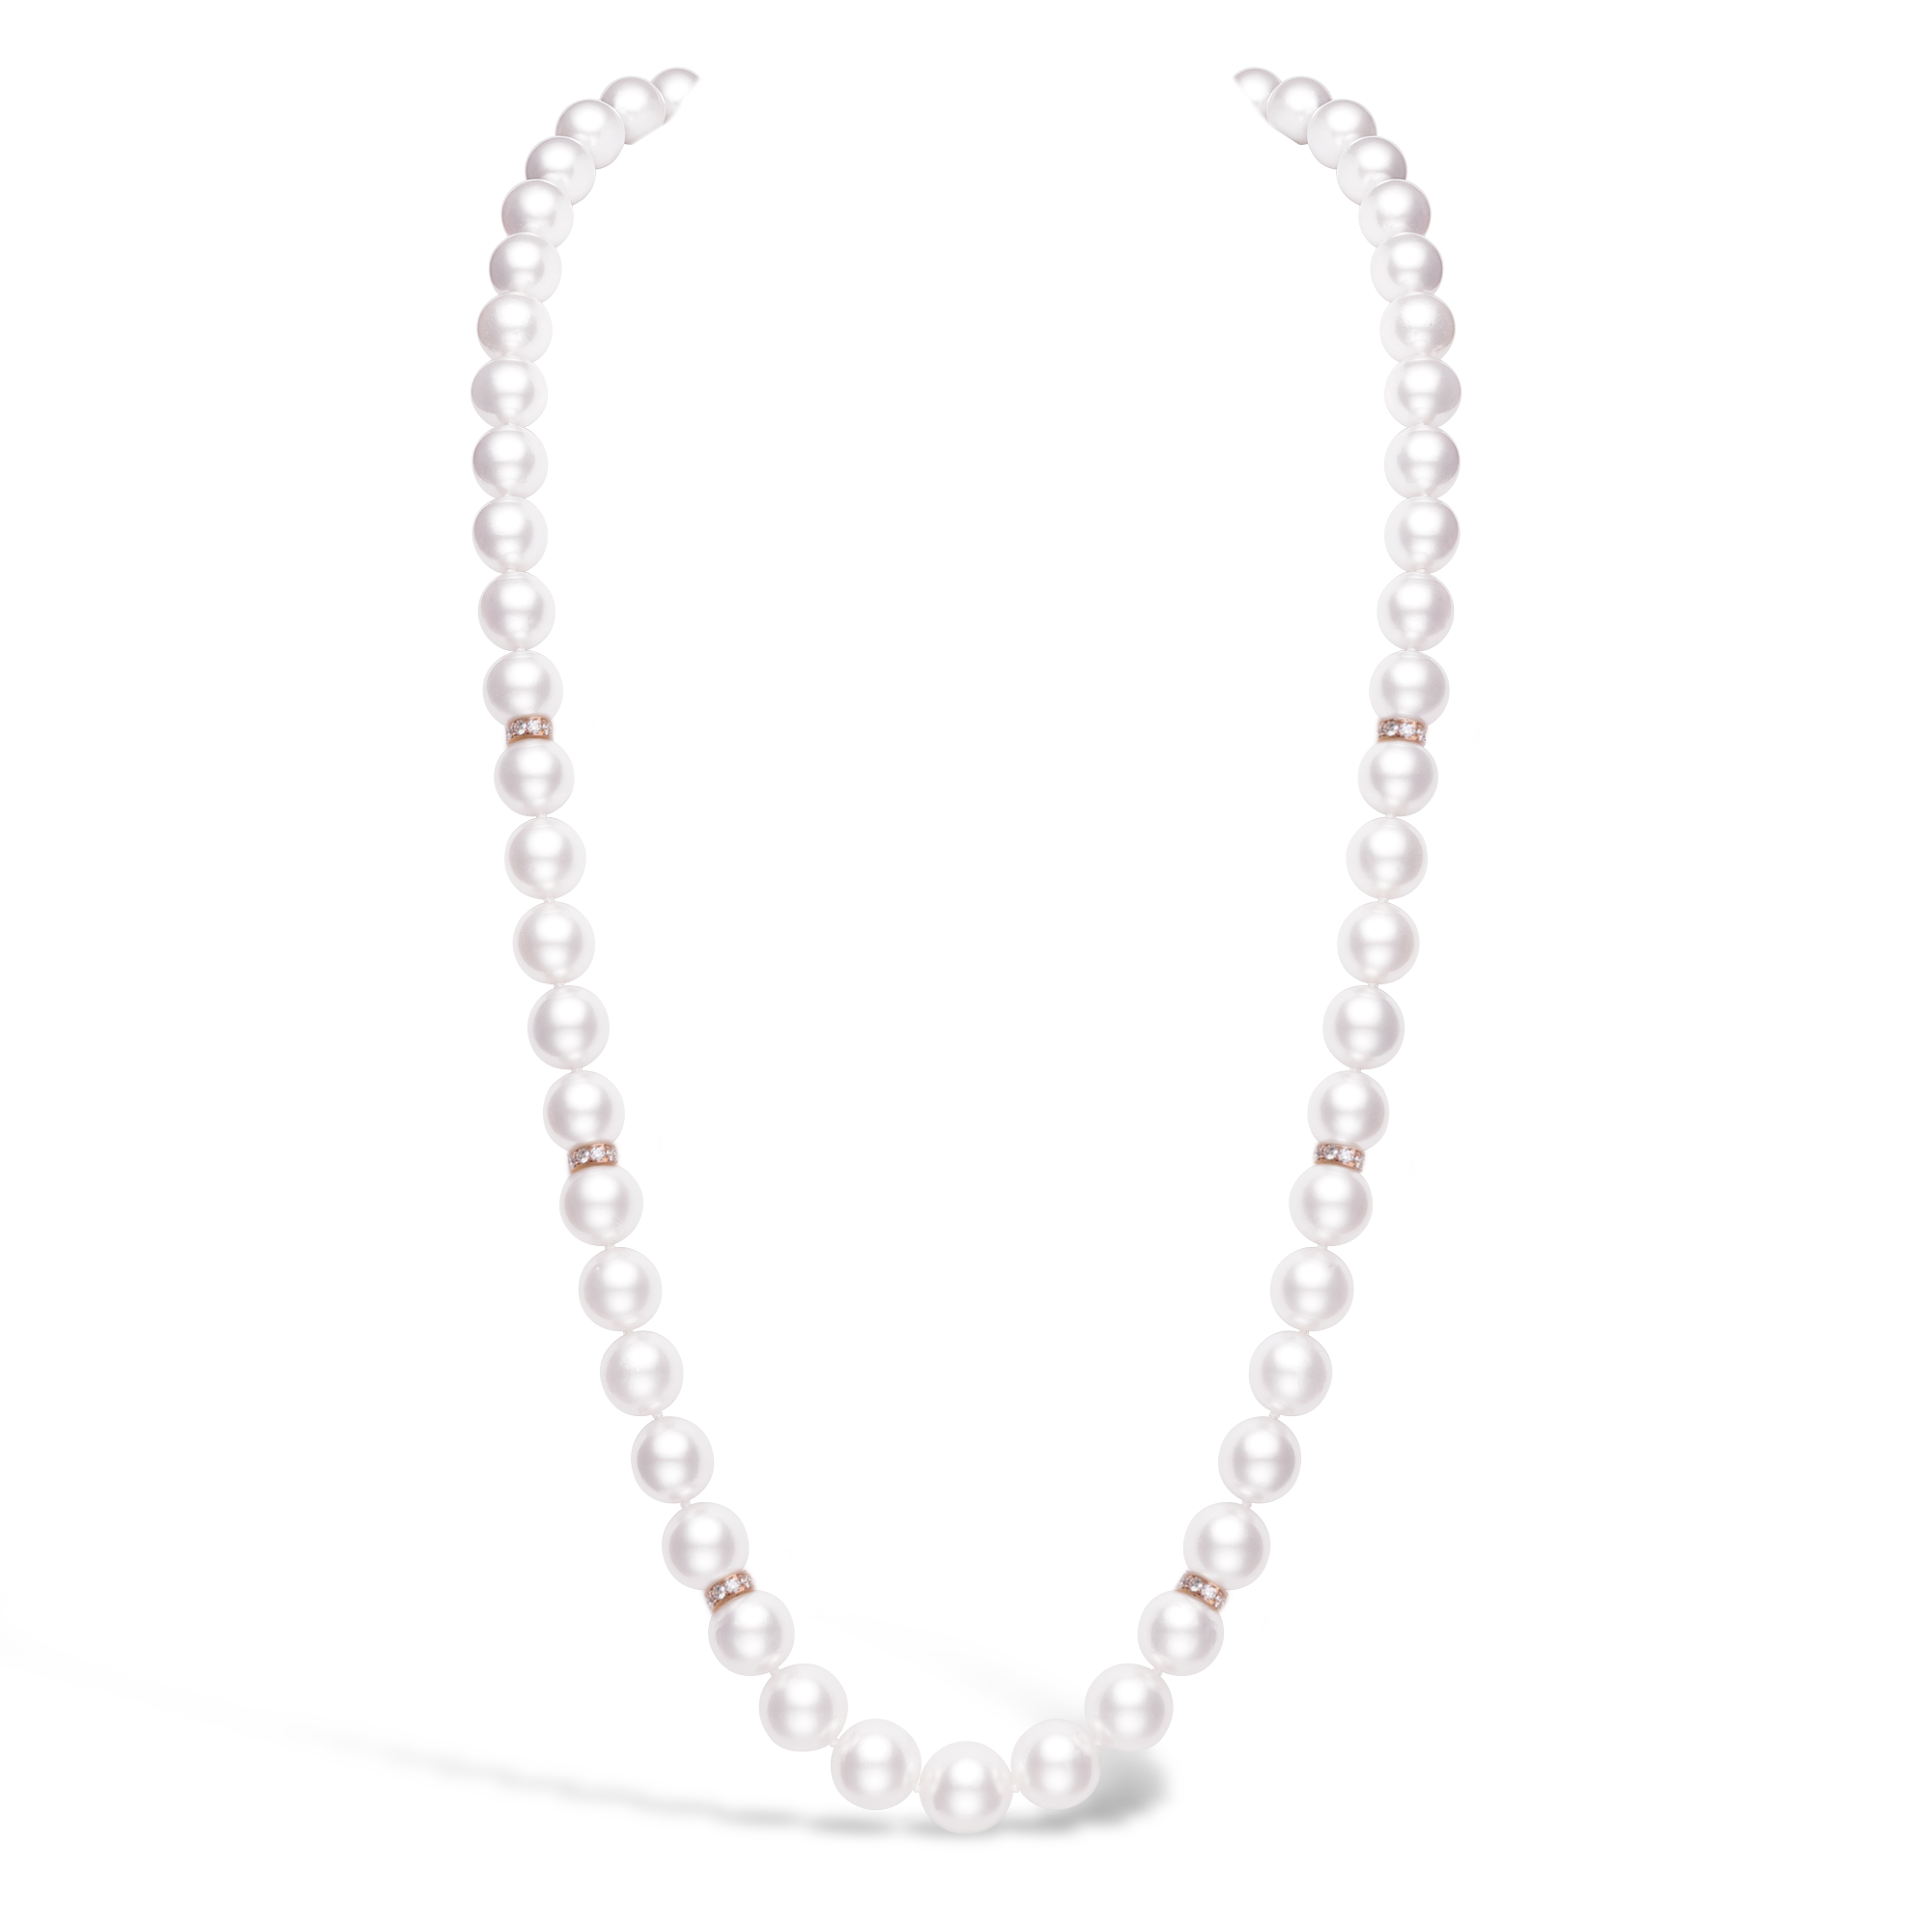 South Sea Pearl Necklace with Diamond Rondell Spacers 9.0mm - 13.7mm_1